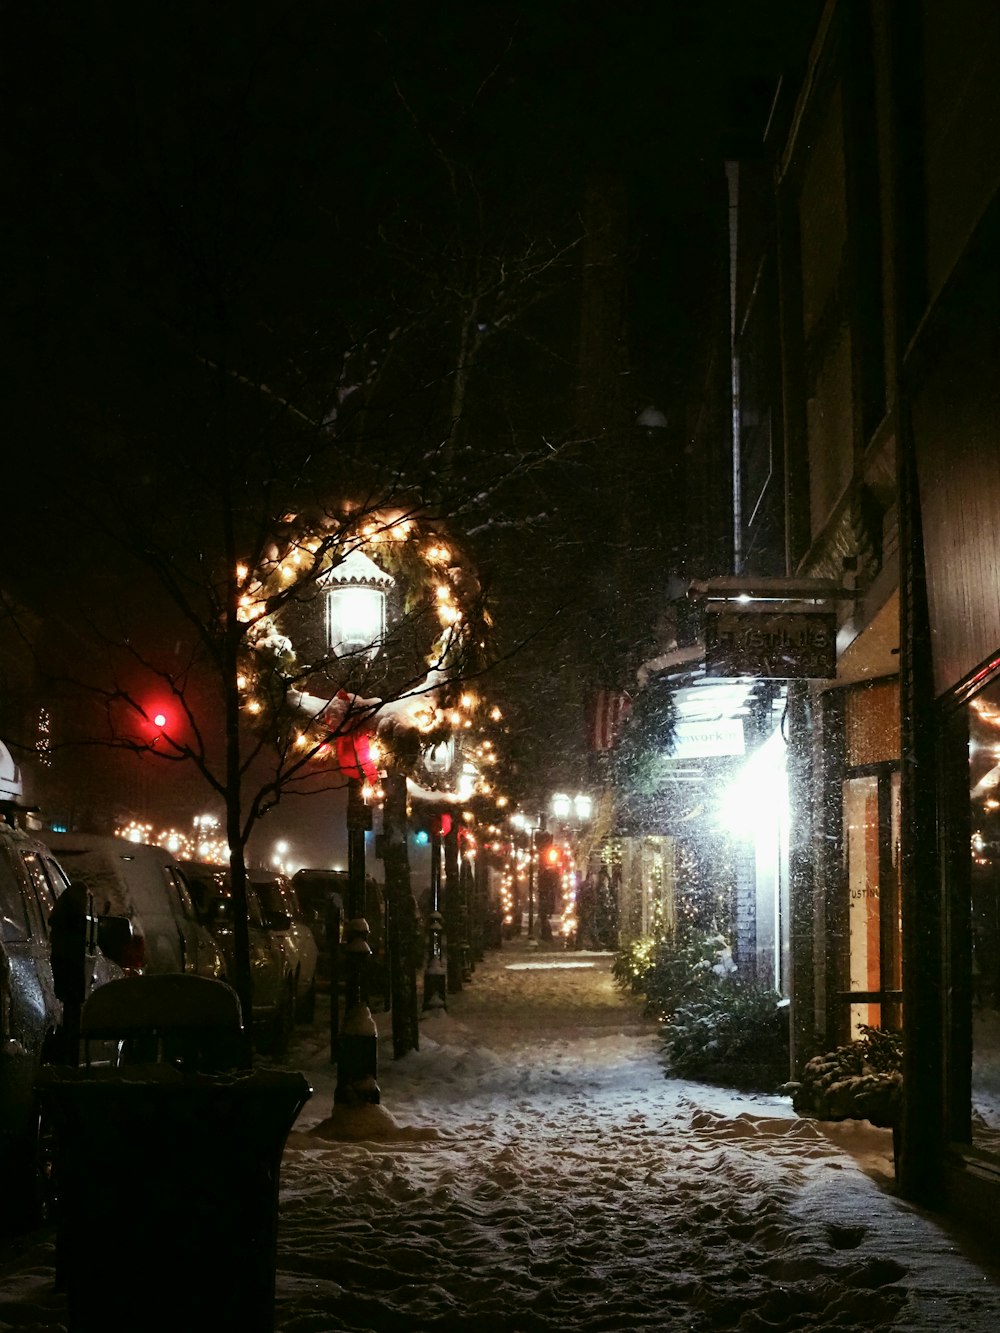 a snowy street at night with lights and a wreath